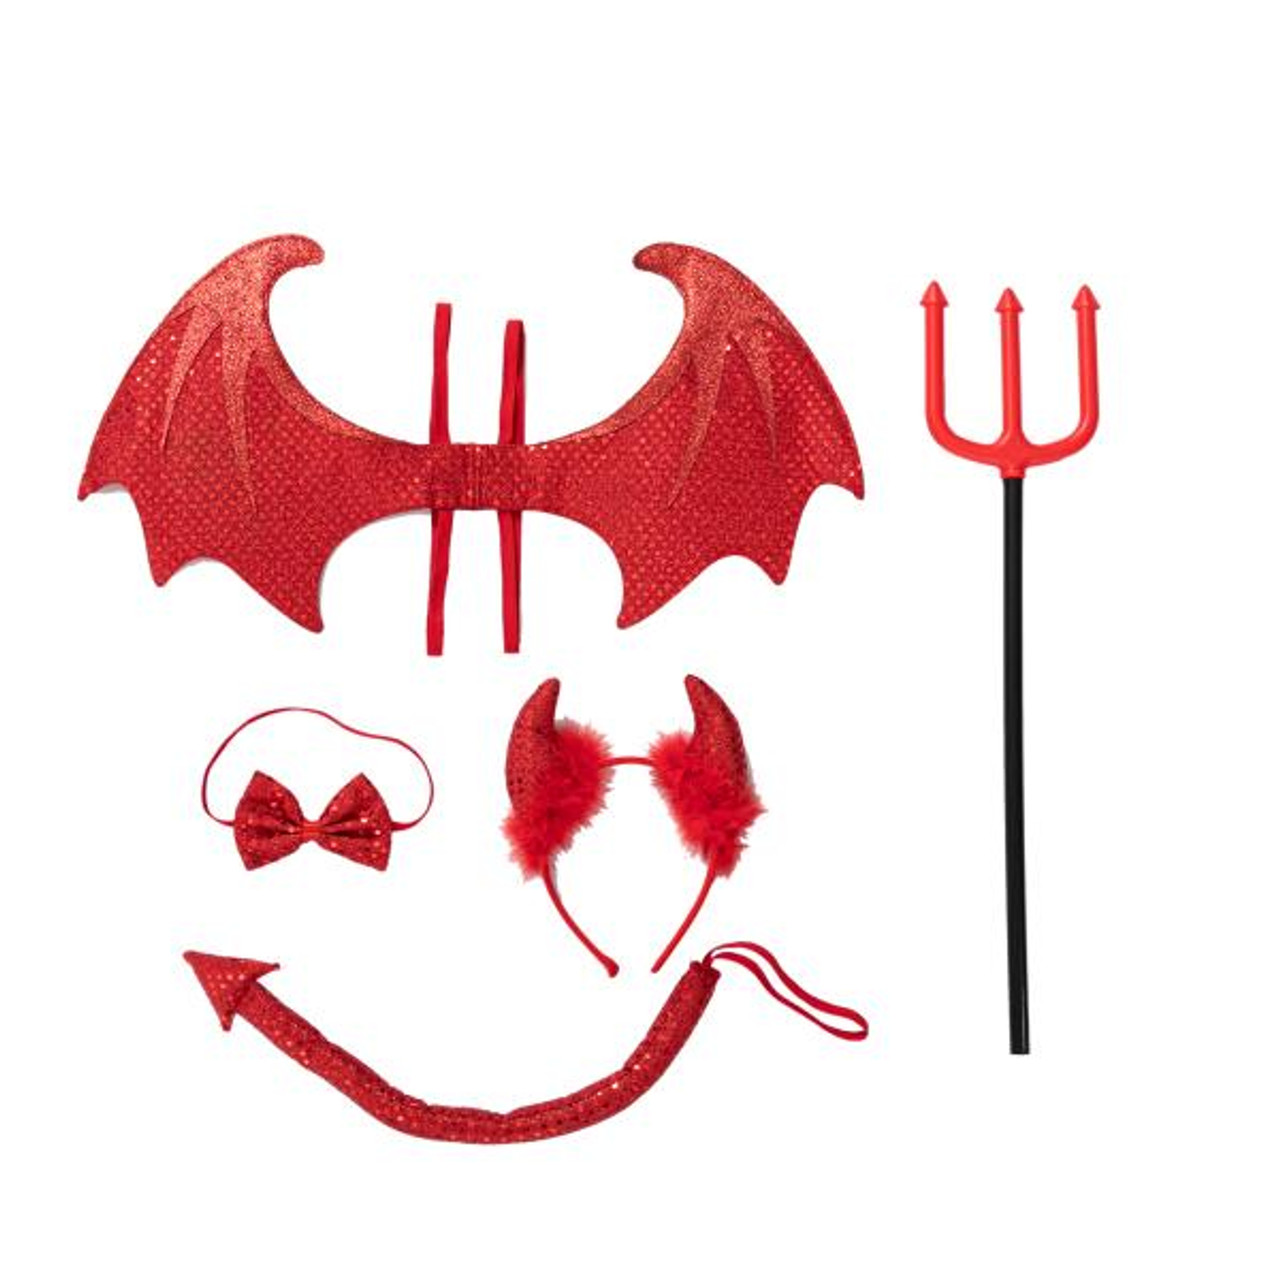 Spooktacular Creations 5 Pieces Halloween Devil Costume Set with Red Devil Wings, Devil Pitchfork, Bow Tie, Sequin Devil Horn Headband, and Devil